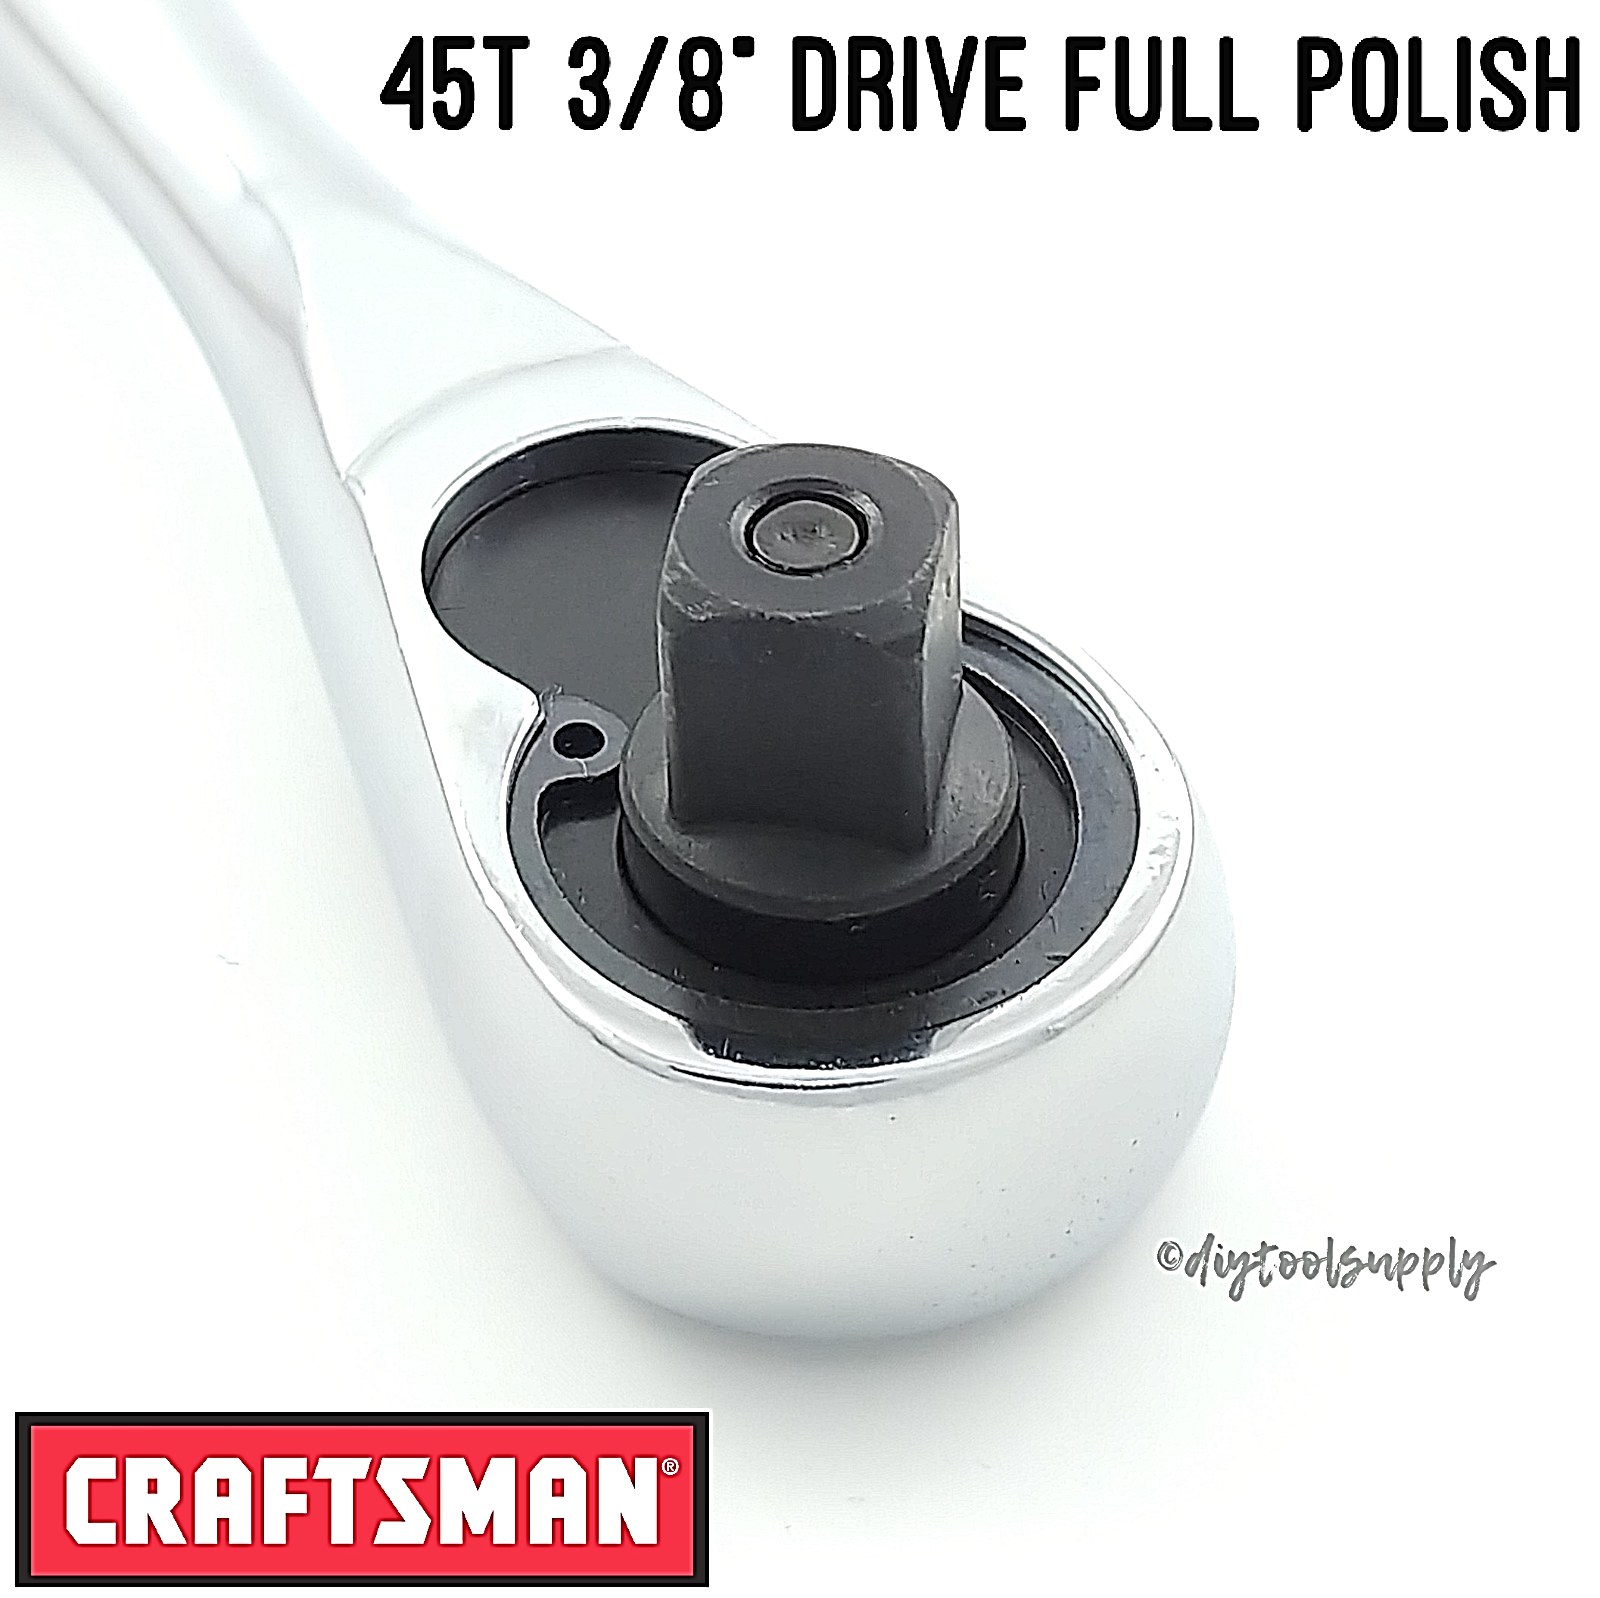 Craftsman 3/8" Drive Ratchet Socket Wrench 45t Full Polish Quick Release